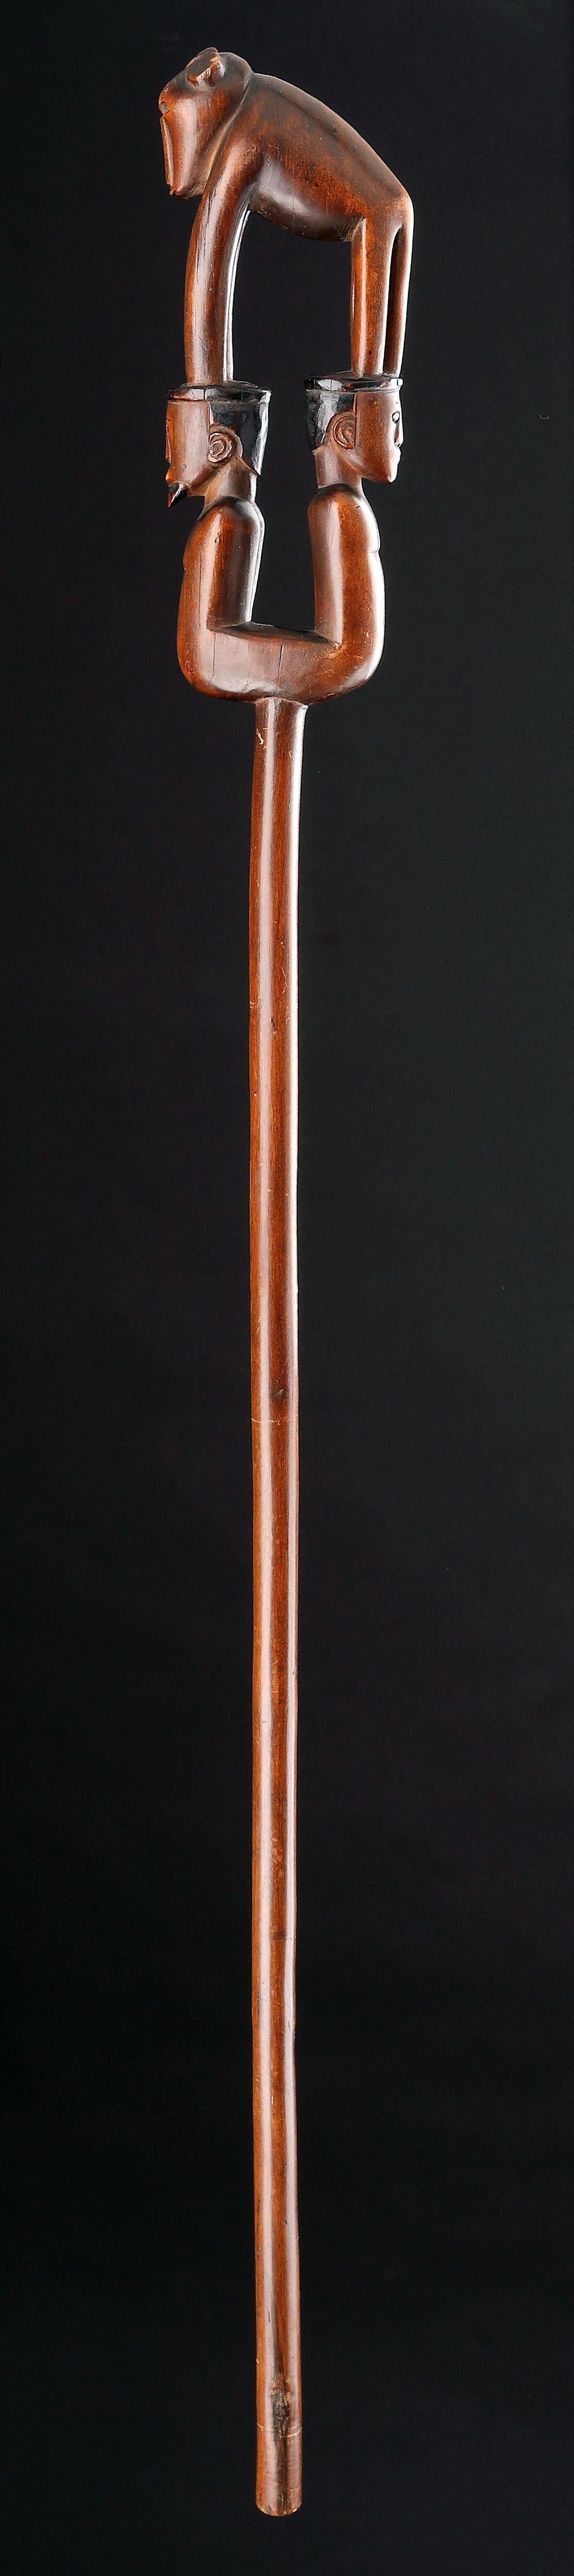 A Rare and Extremely Fine South African Tsonga Prestige Staff by the ‘Baboon Master’
Depicting a Zulu elder wearing a head-ring 
Superb silky reddish brown patina

Late 19th Century 

Size: 104cm high - 41 ins high 

These staffs were used by